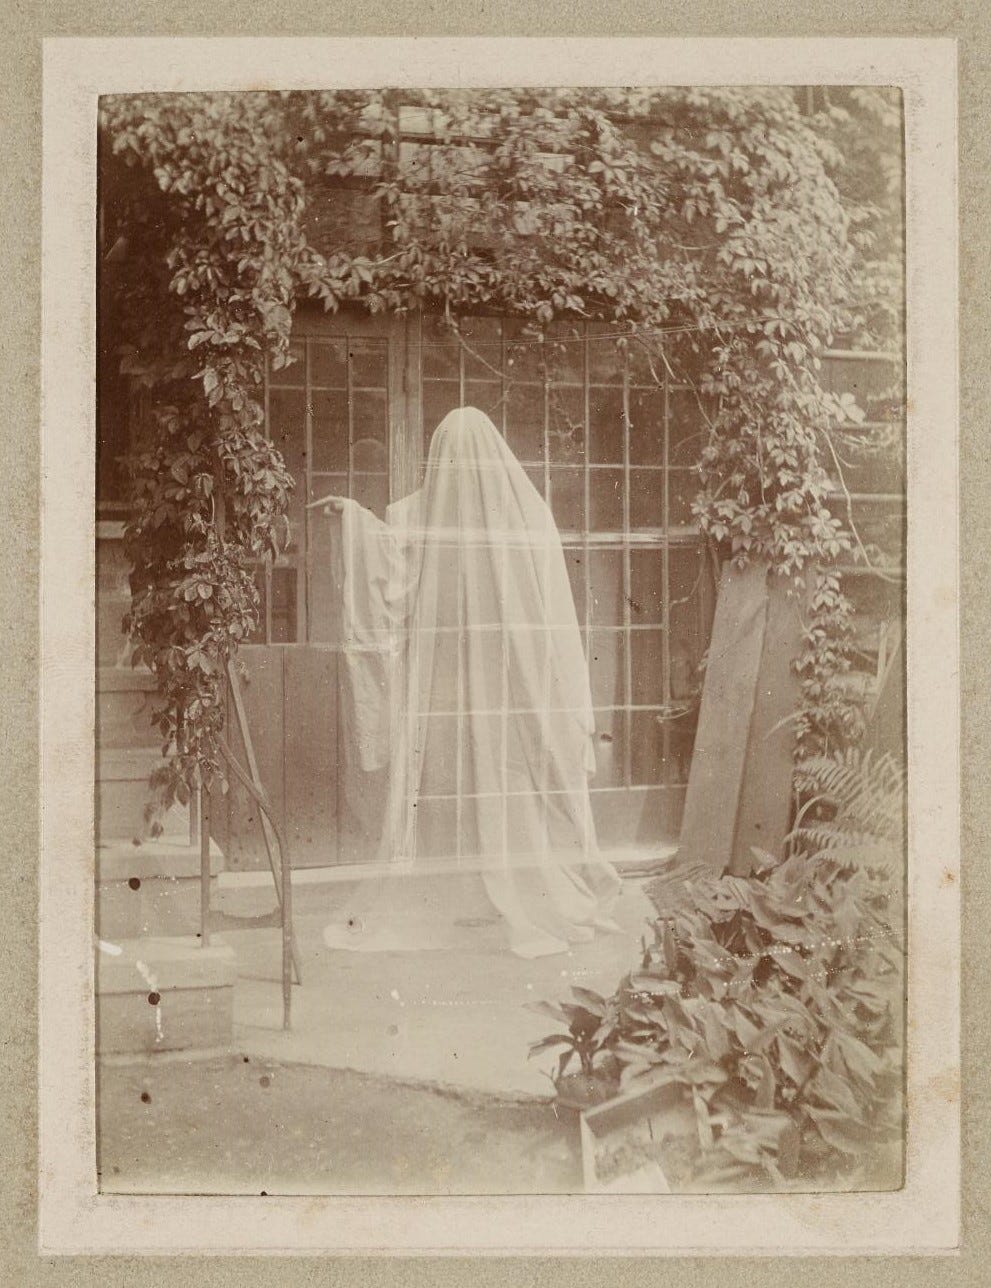 A white-translucent sheet-covered ghost, in front of a glazed and overgrown building entrance, points left at something beyond the photo’s frame.